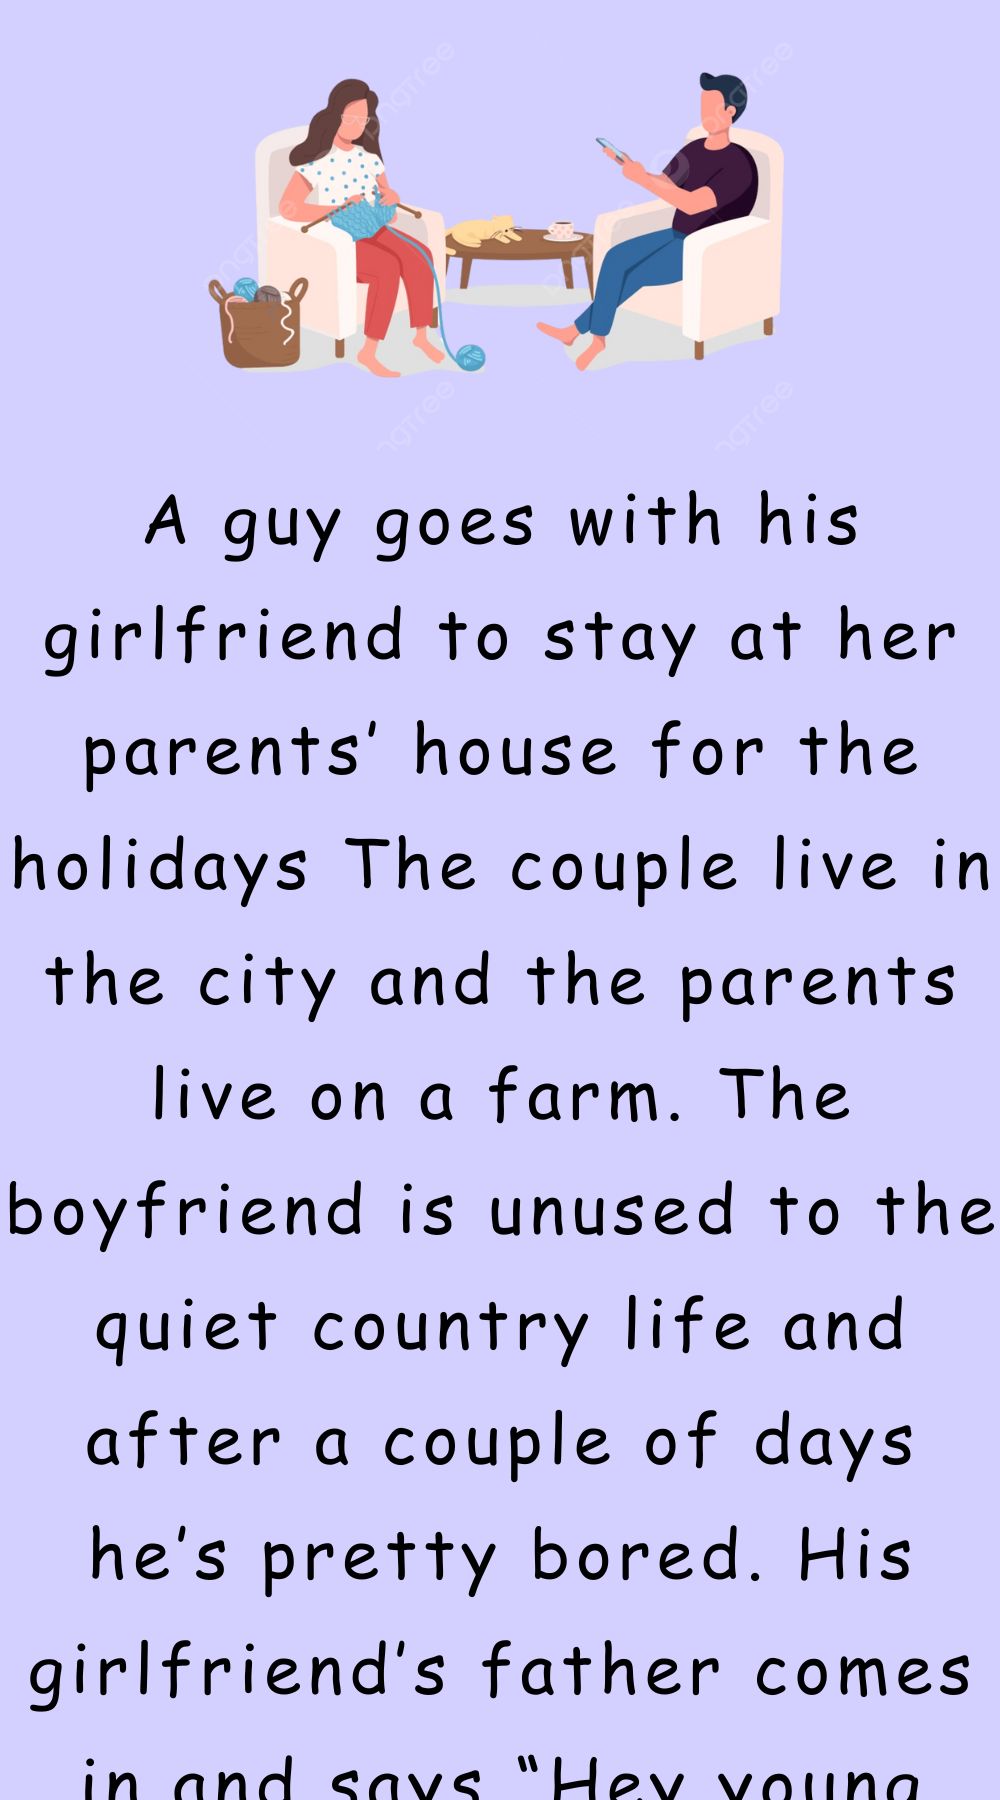 The couple live in the city and the parents live on a farm